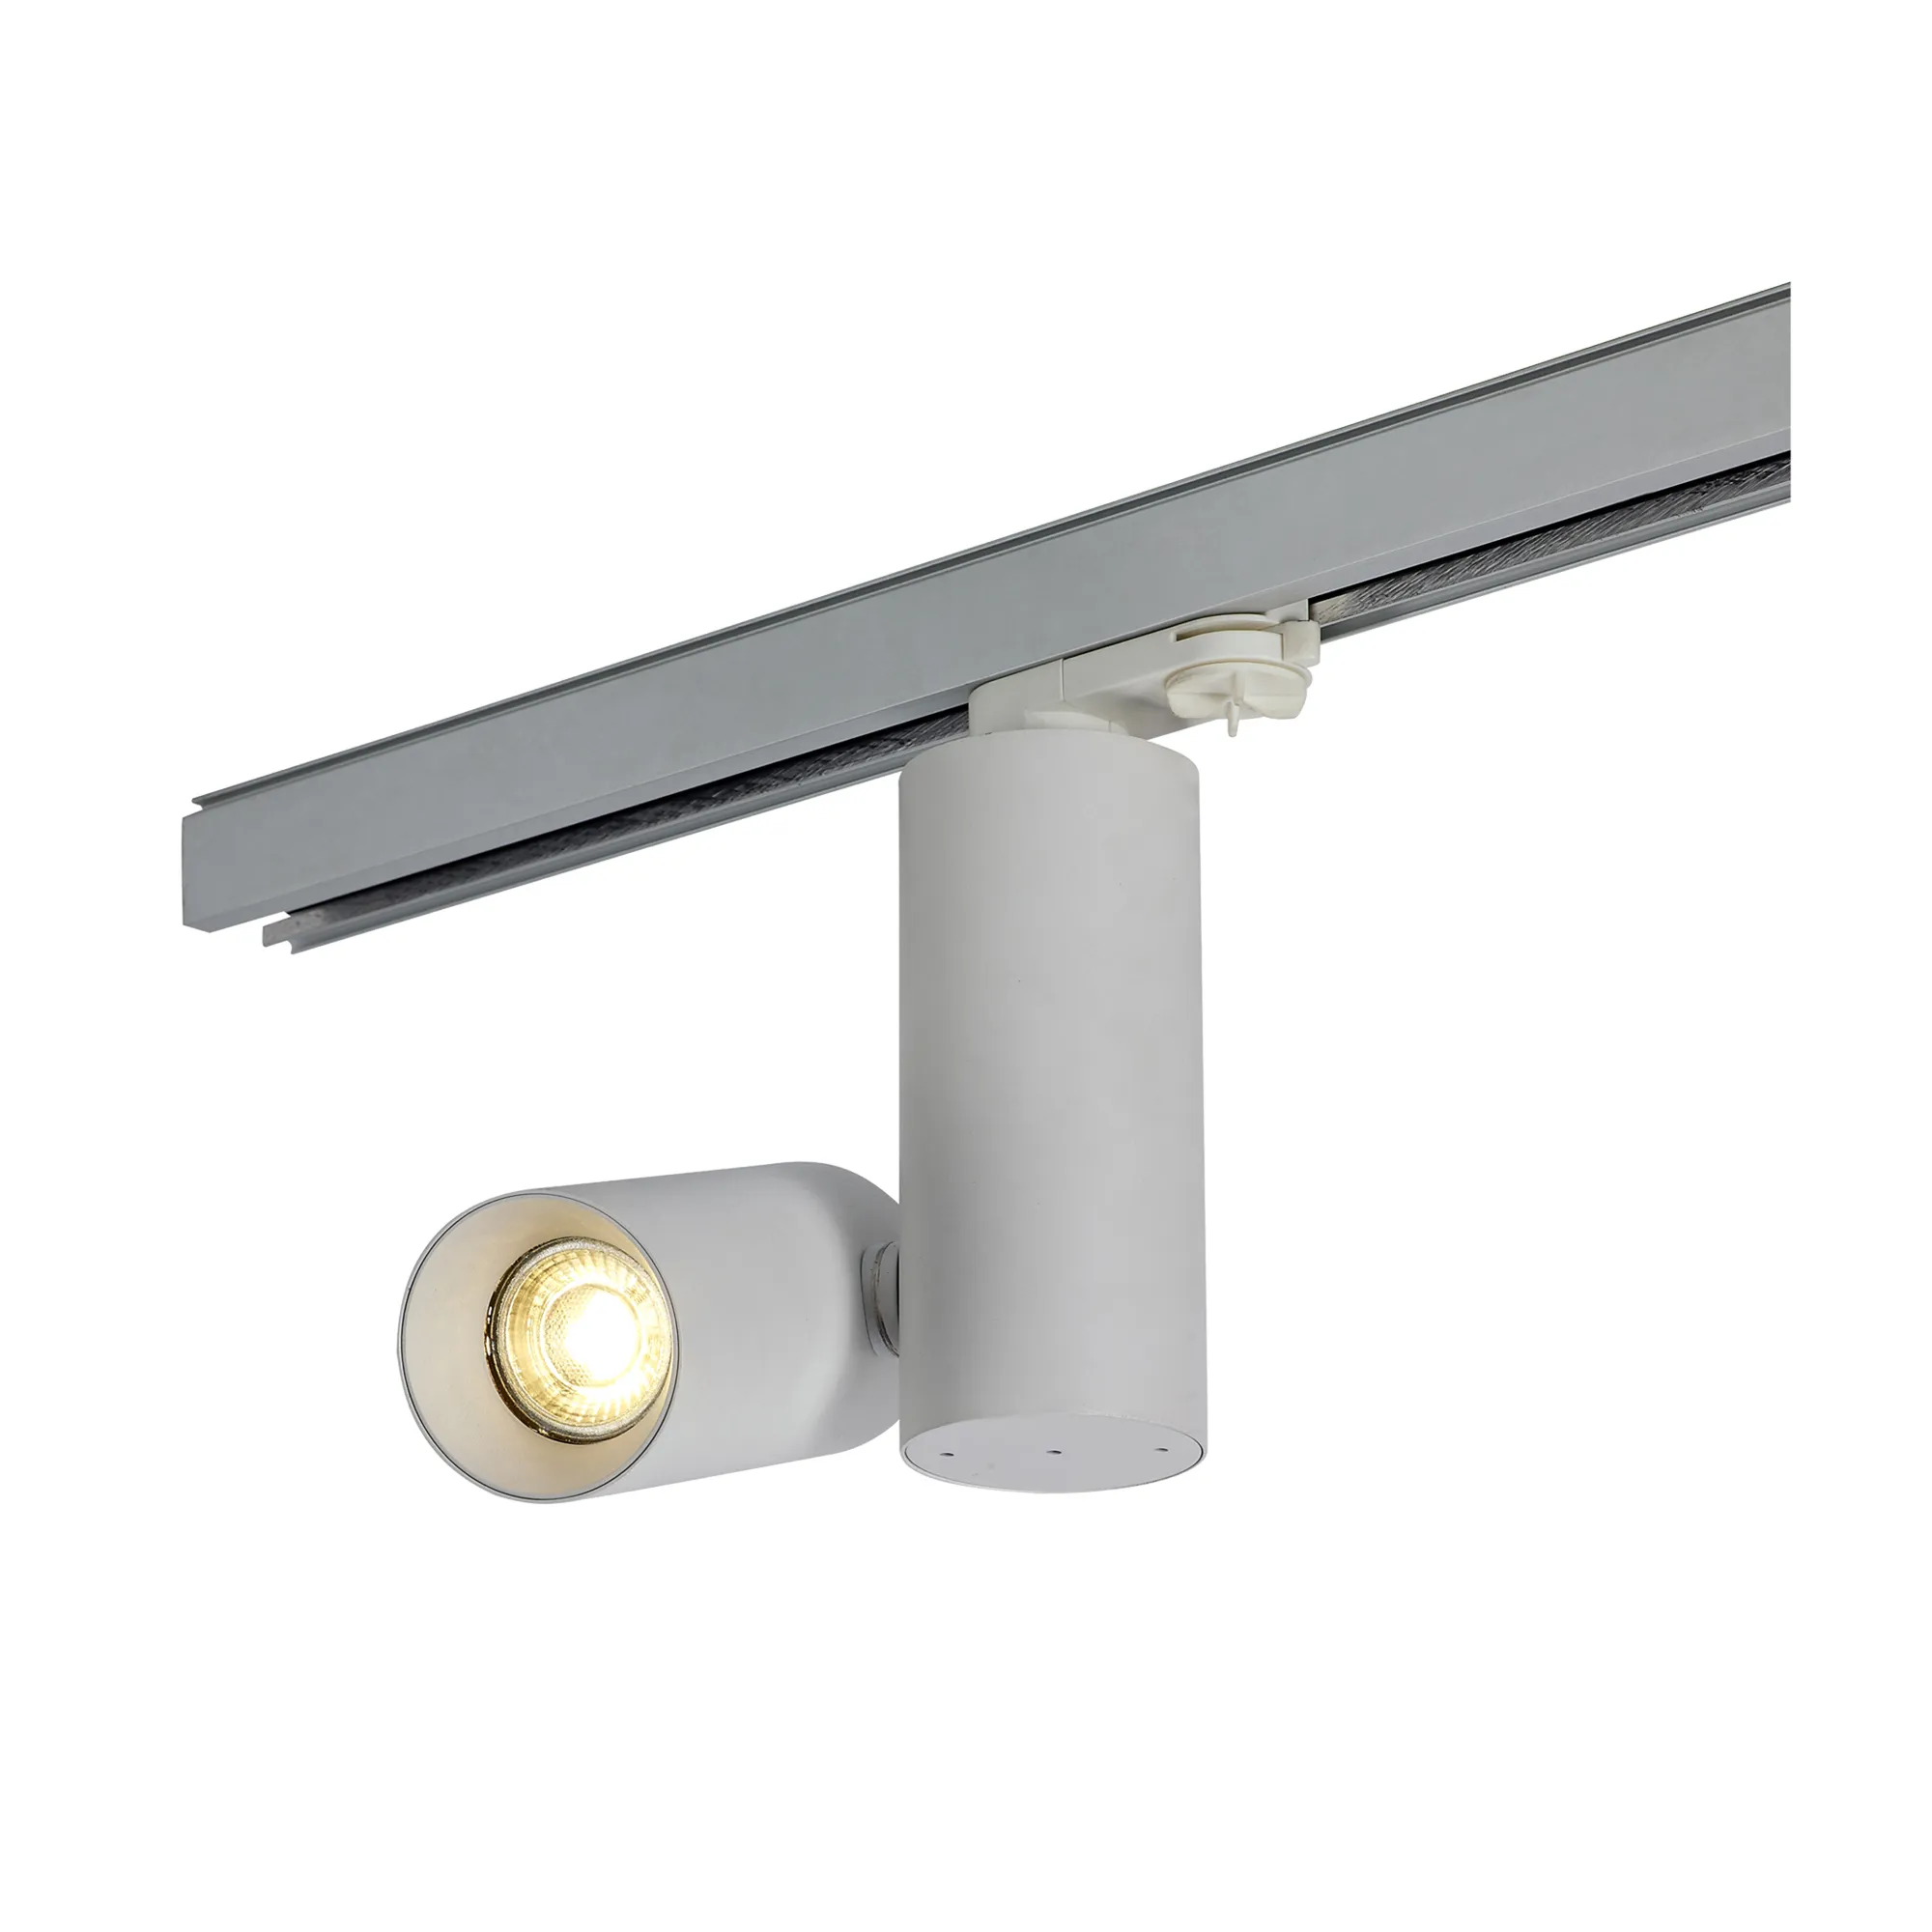 DL350284  Eos T 12 Powered By Tridonic 12W 1200lm 2700K 12°;300mA; White & White;Dual Cylinder Track Light; 90° Tilt; 350° R/tion;DRIVER NOT INC.5yrs Warranty